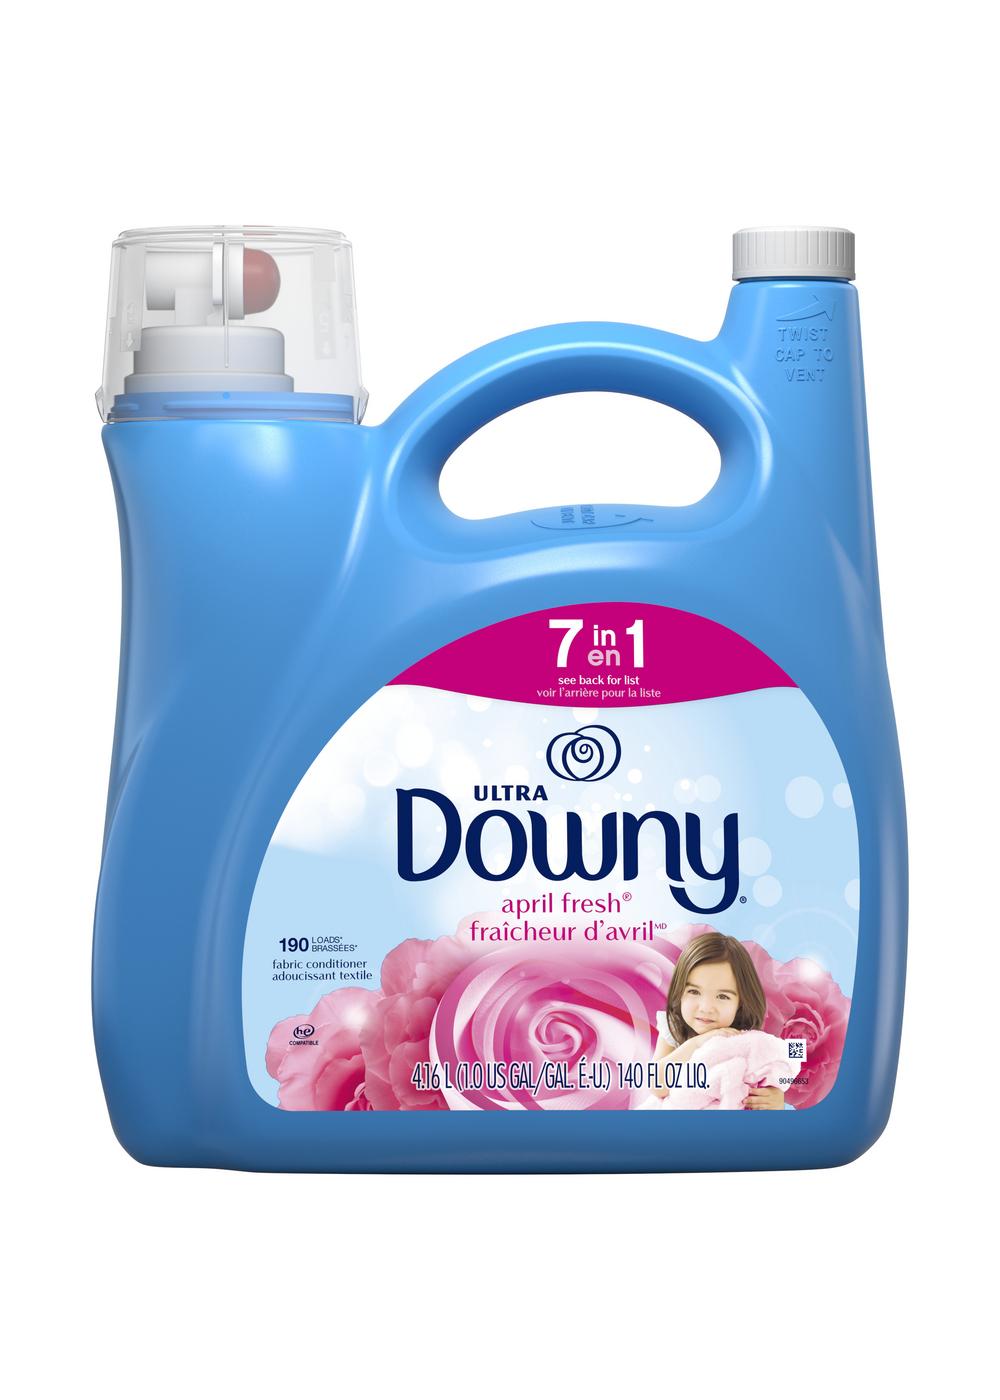 Downy Ultra HE Liquid Fabric Conditioner, 190 Loads - April Fresh; image 1 of 2